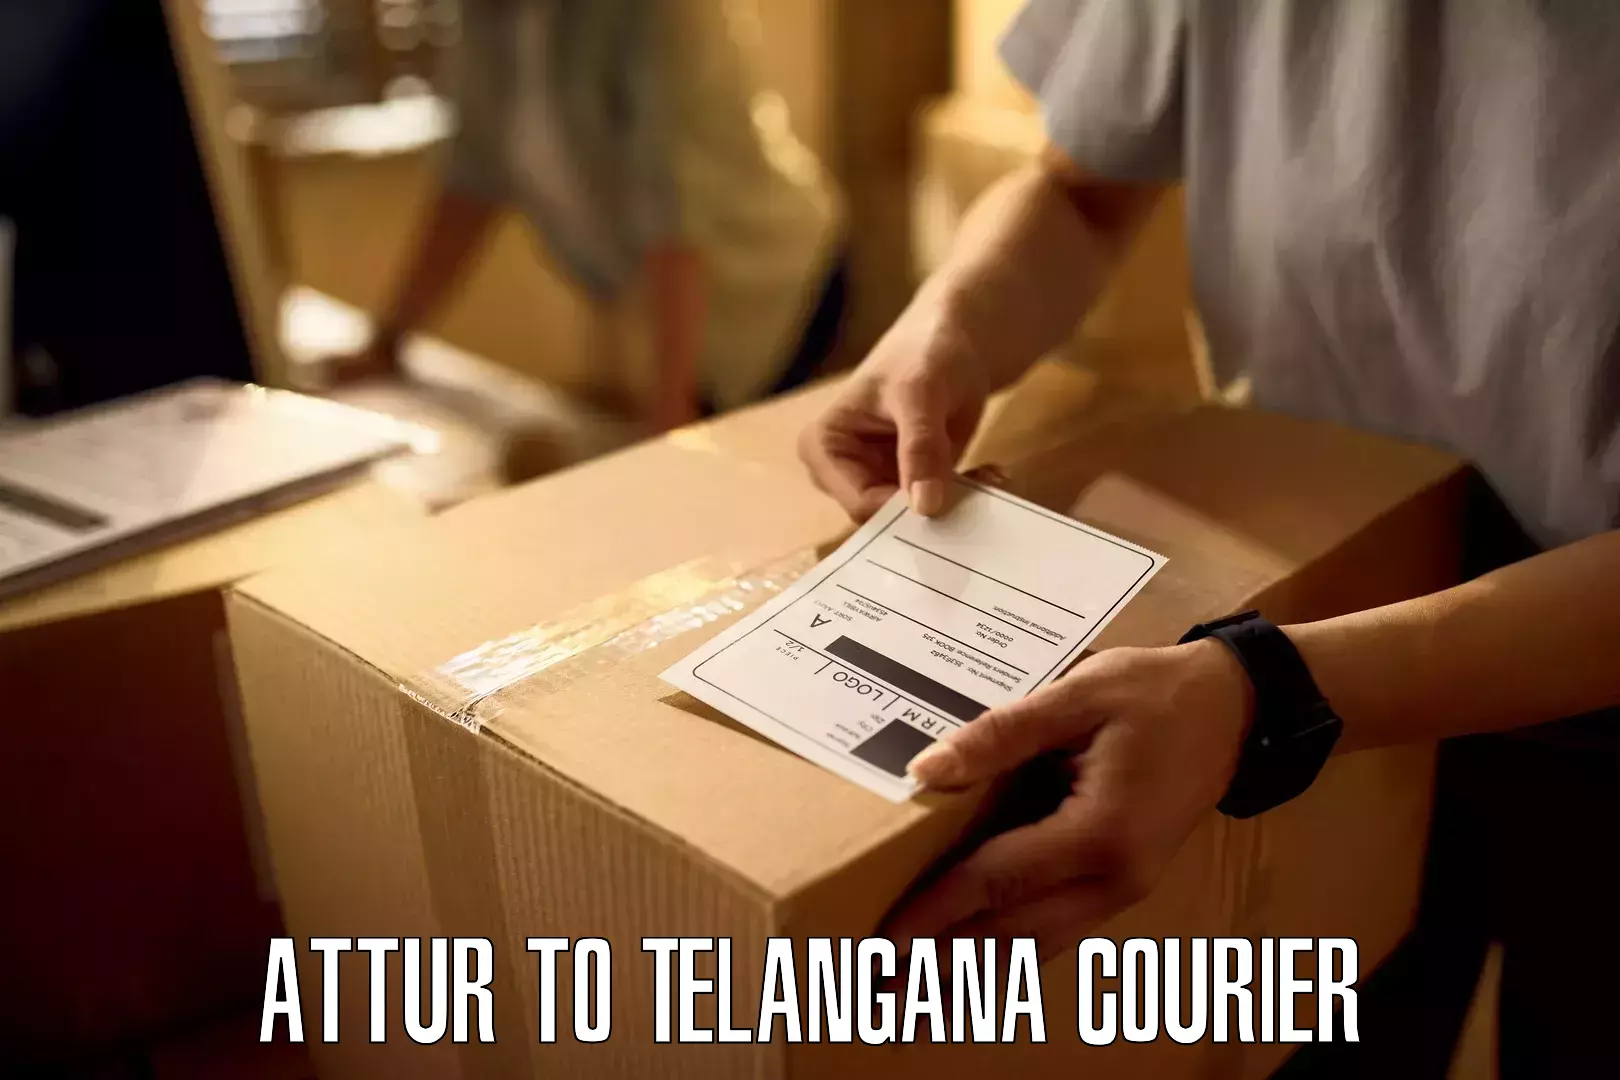 Next-day delivery options in Attur to Telangana